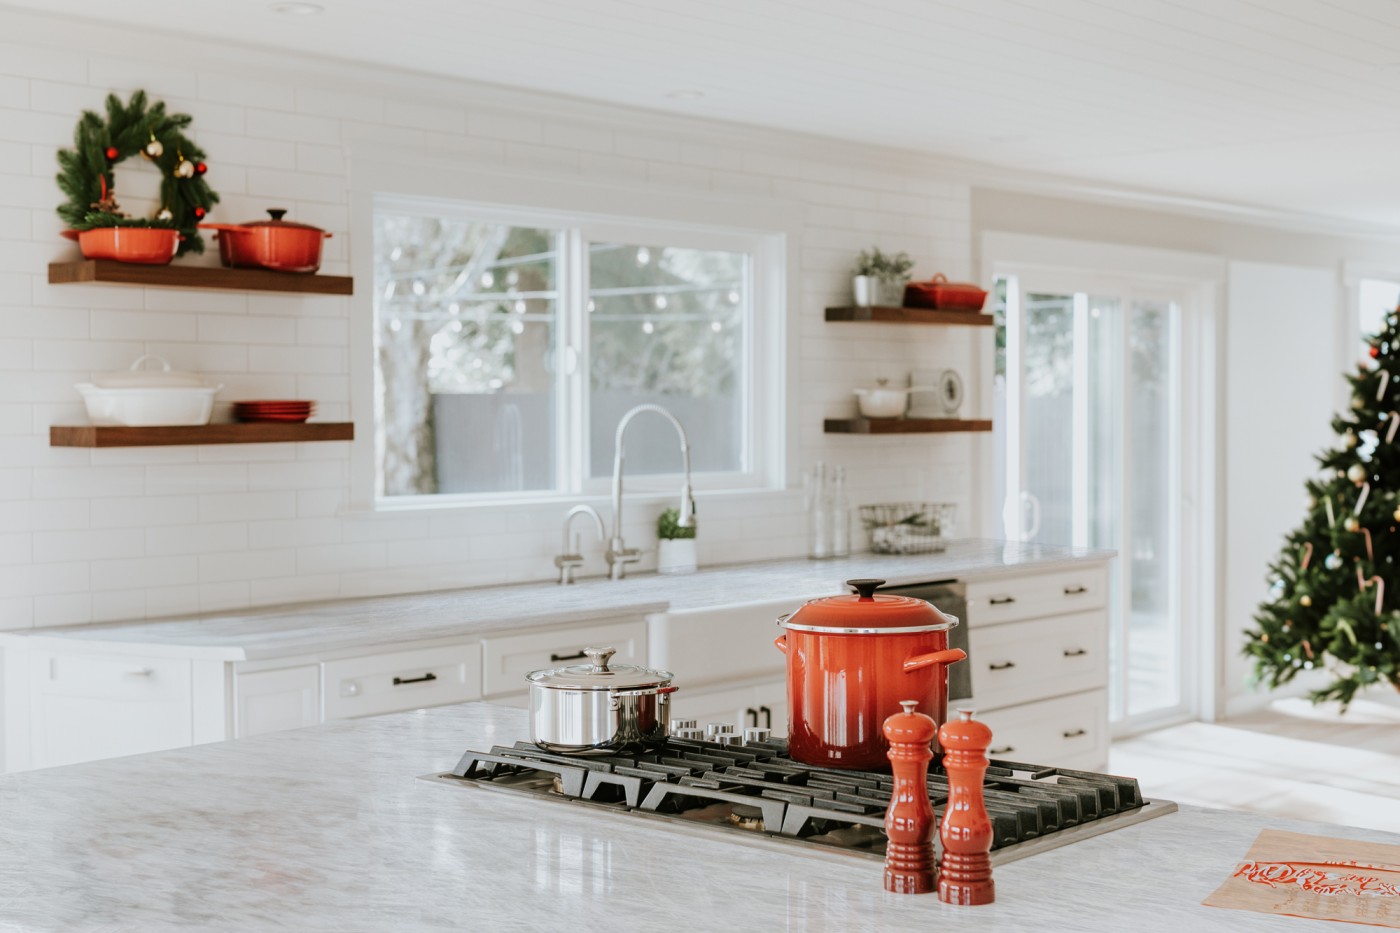 5 ideas for decorating your kitchen island for Christmas